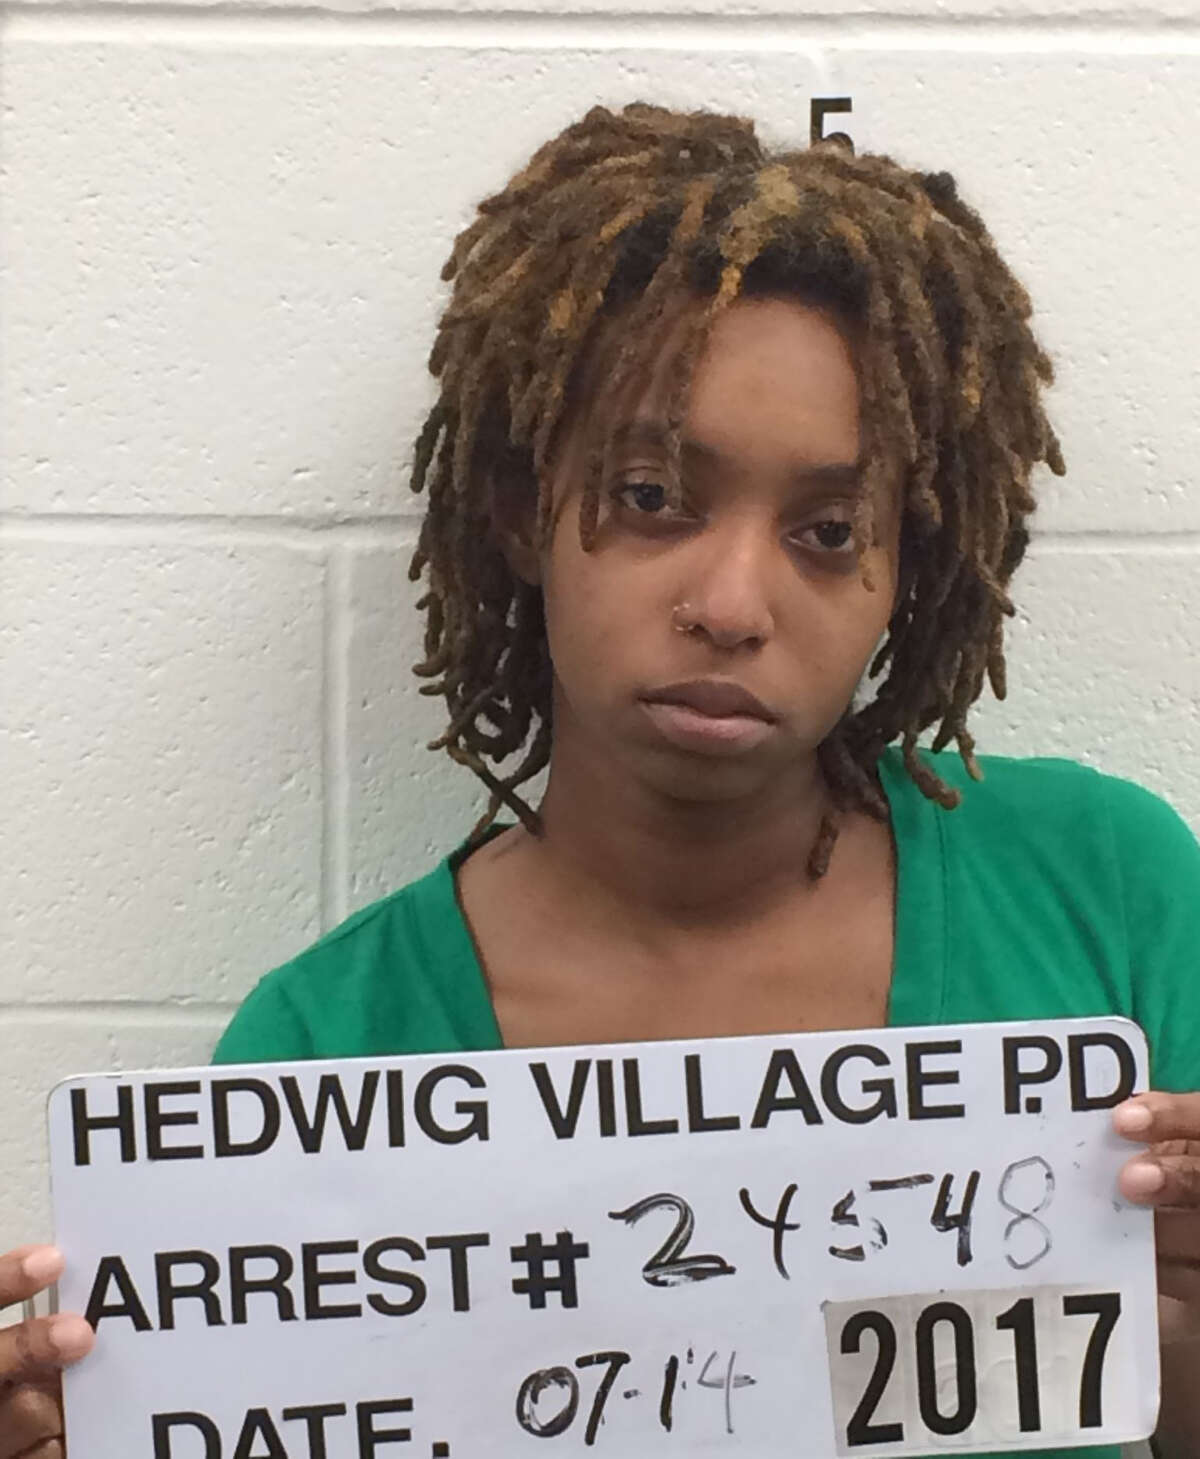 Timesha Wilson, 22, was arrested and charged with capital murder for theÂ killing of 79-year-old Hedwig Village woman, Janeil Bernard.Â 